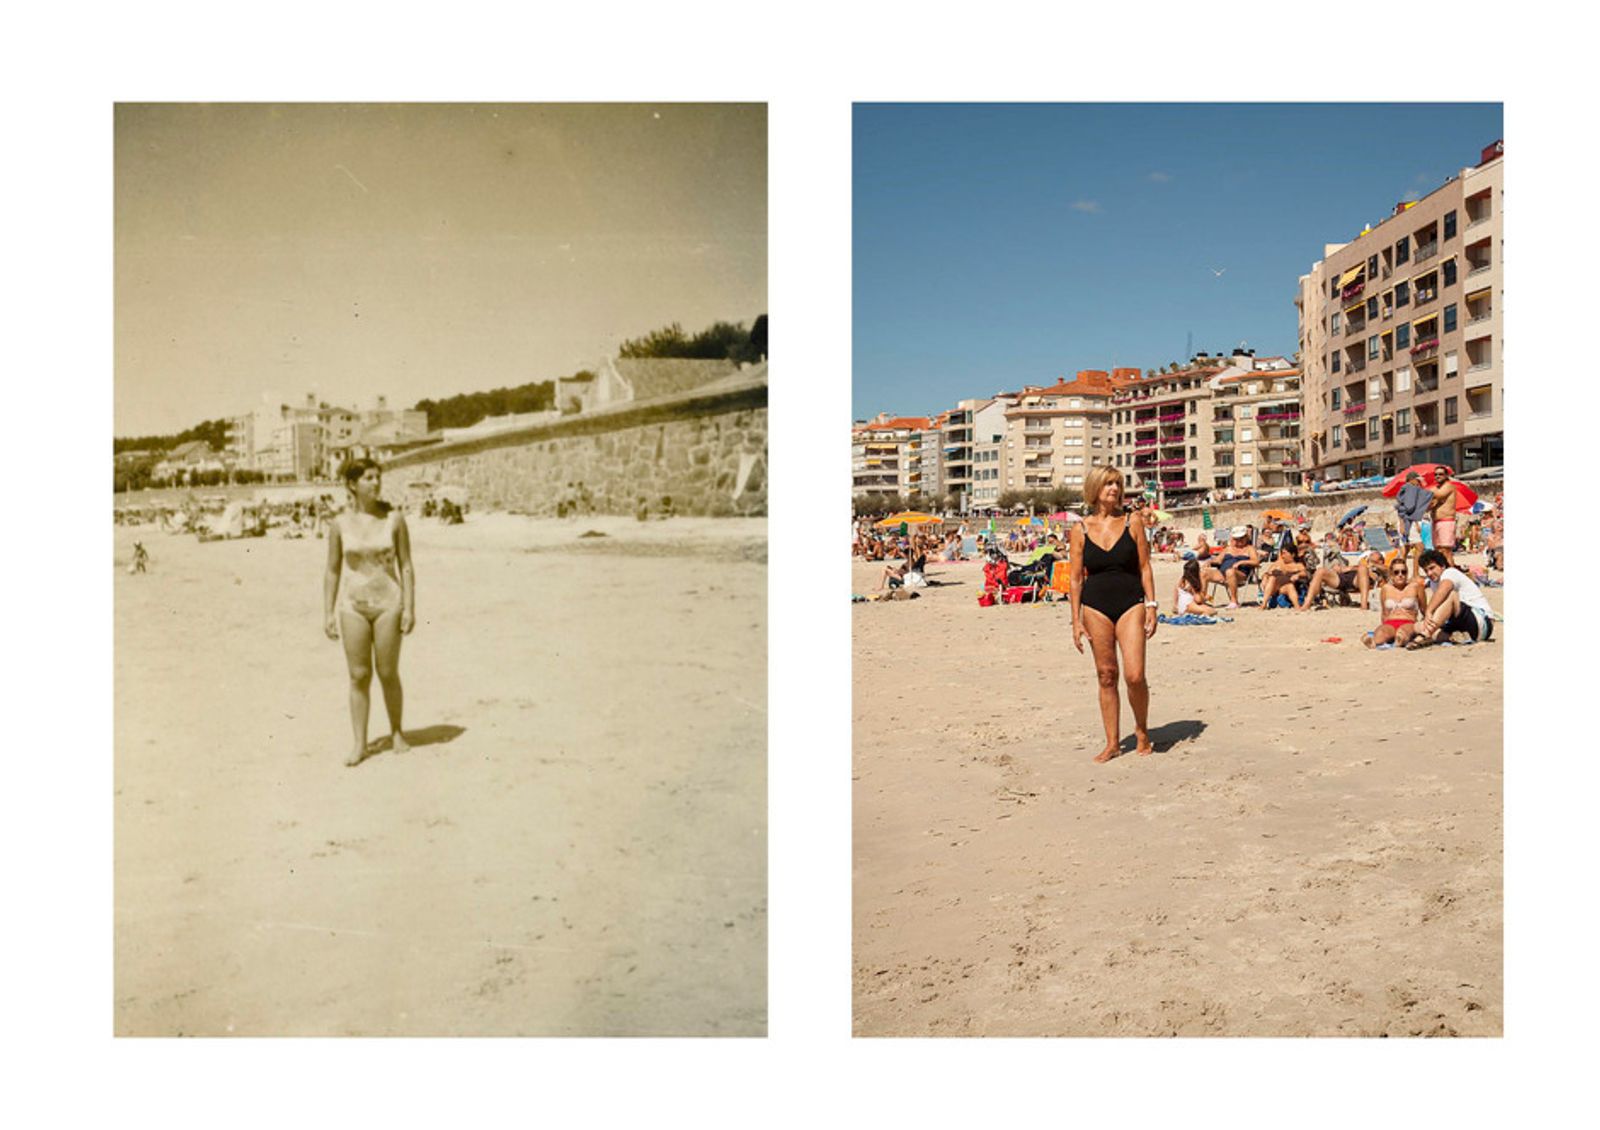 © Silvia Dominguez - Image from the Sanxenxo - Family Albums photography project